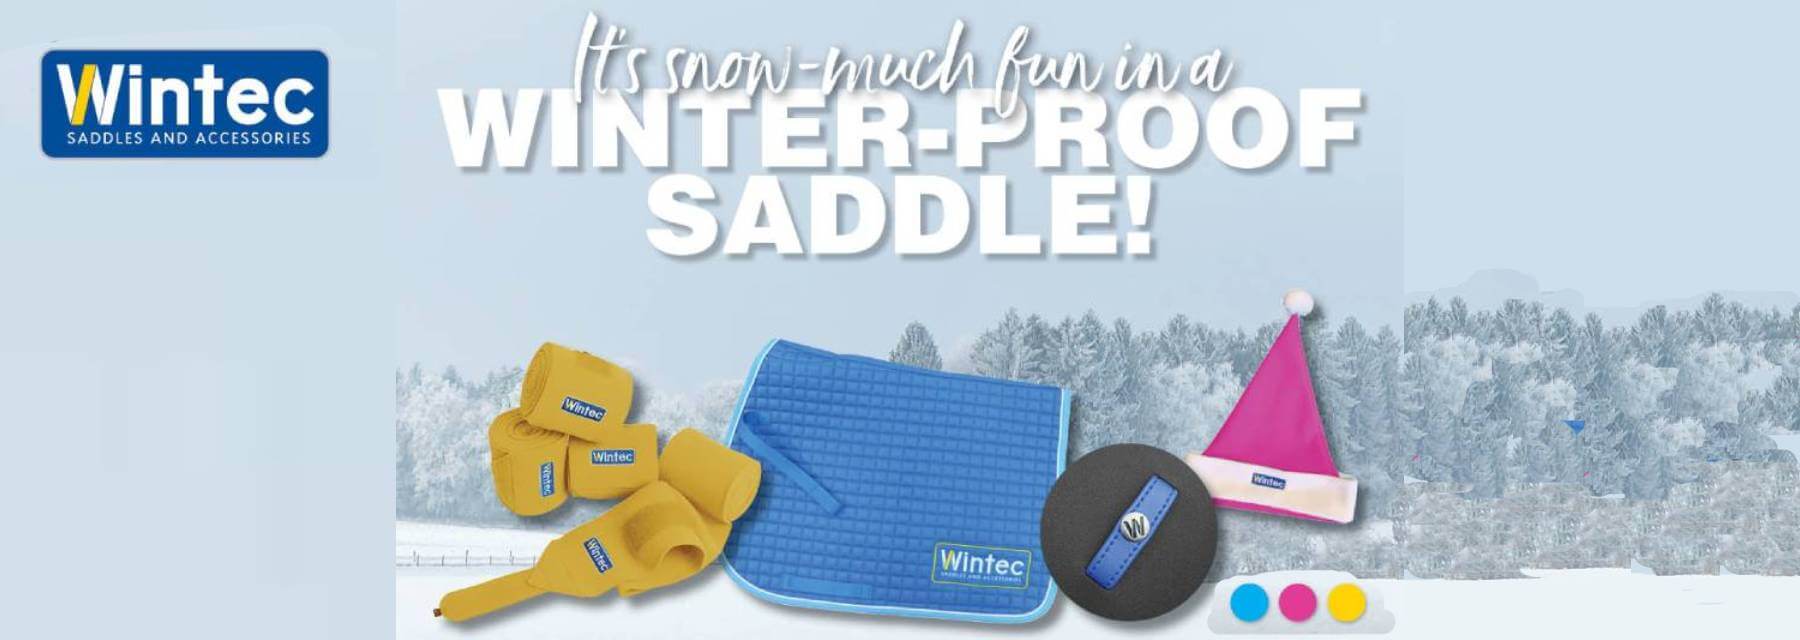 wintec saddle offer - free riding pack with every qualifying saddle t&c apply